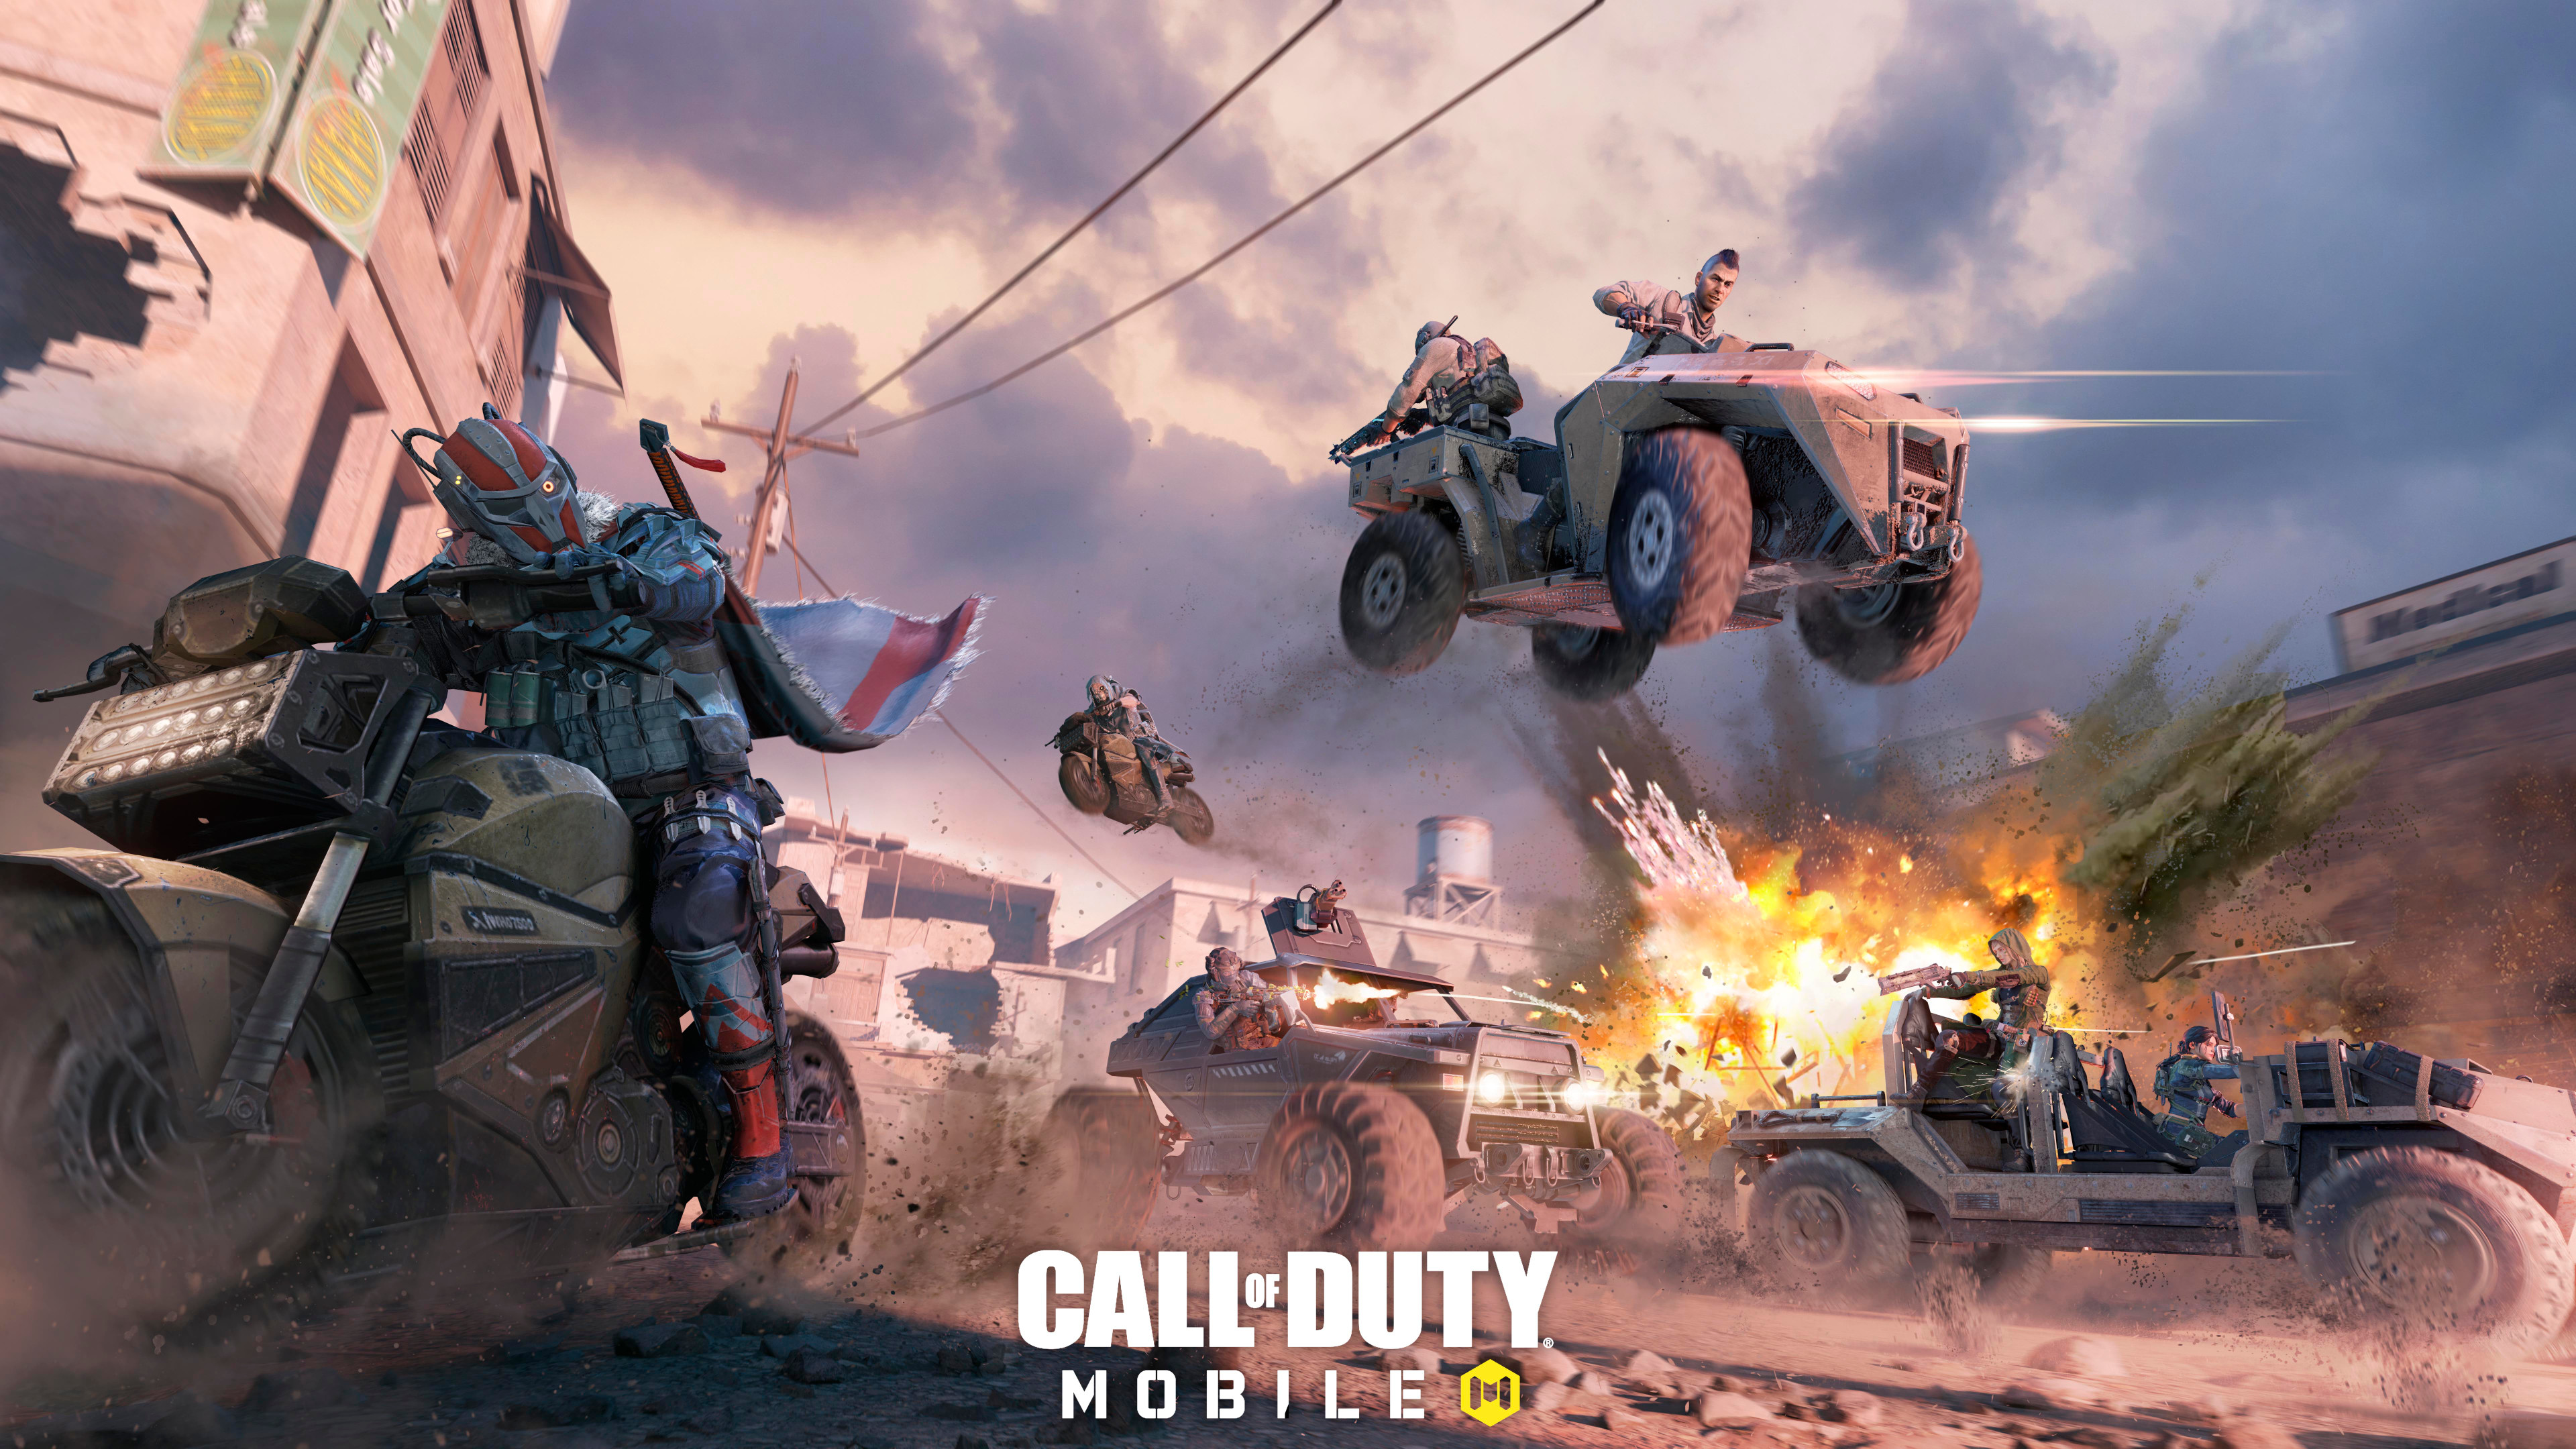 Download Call Of Duty: Mobile wallpaper for mobile phone, free Call Of Duty: Mobile HD picture